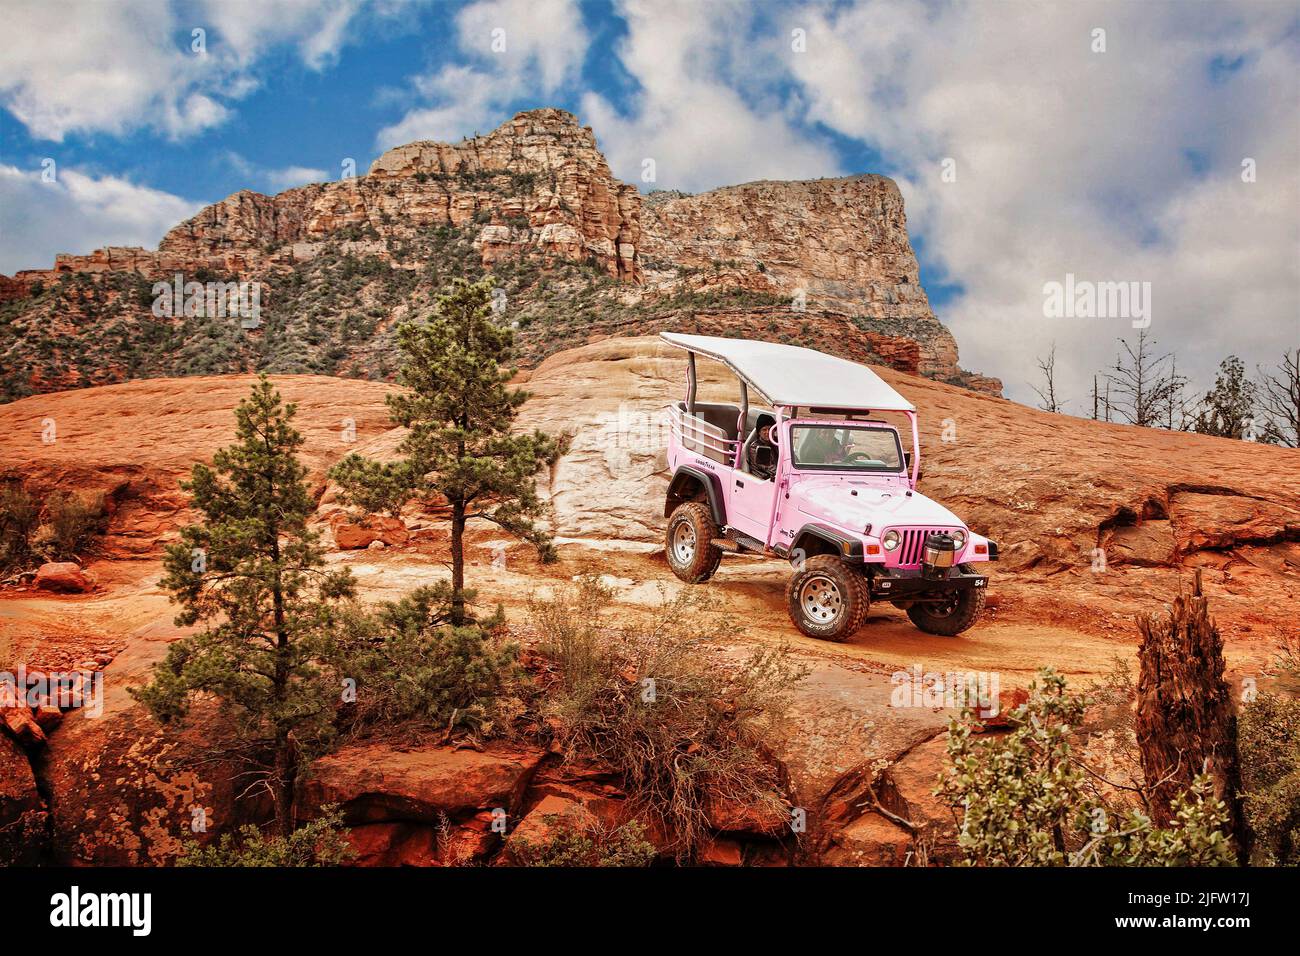 A Jeep tour explores the red rock in the backcountry around Sedona, Arizona. Stock Photo